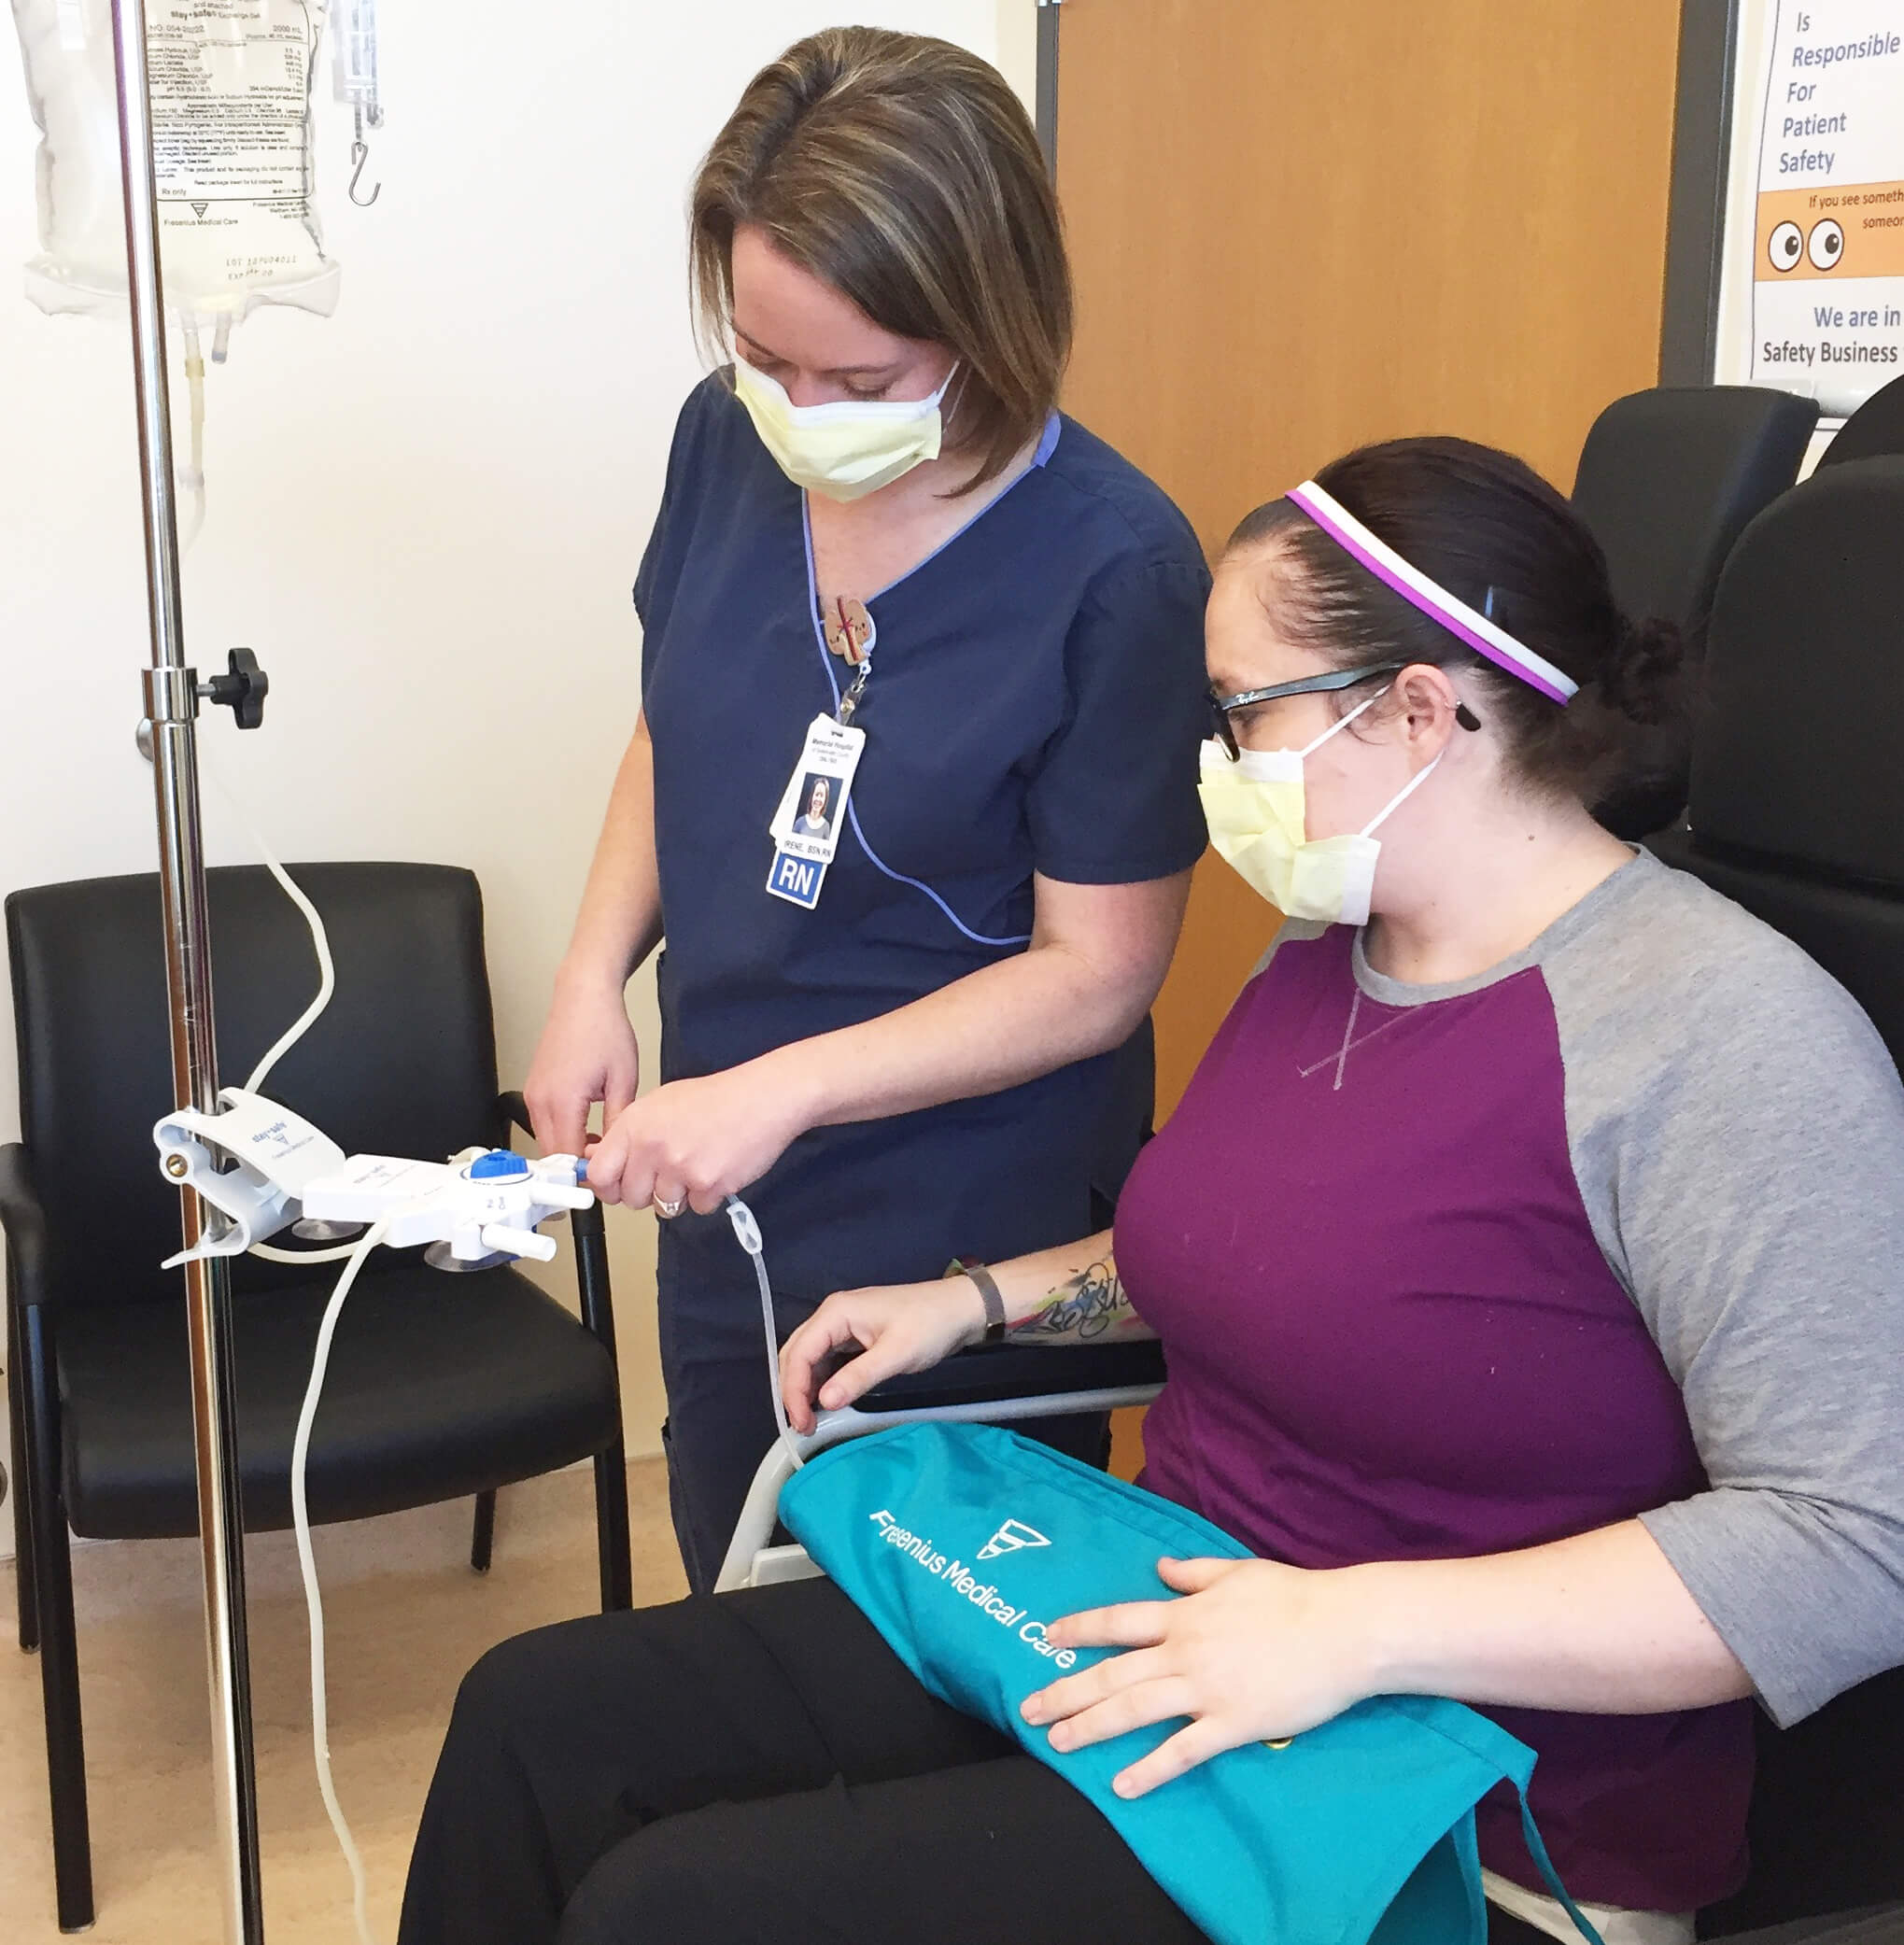 egistered nurse Irene Brewer, left, and patient care technician Jessica Ice demonstrate the peritoneal dialysis process.